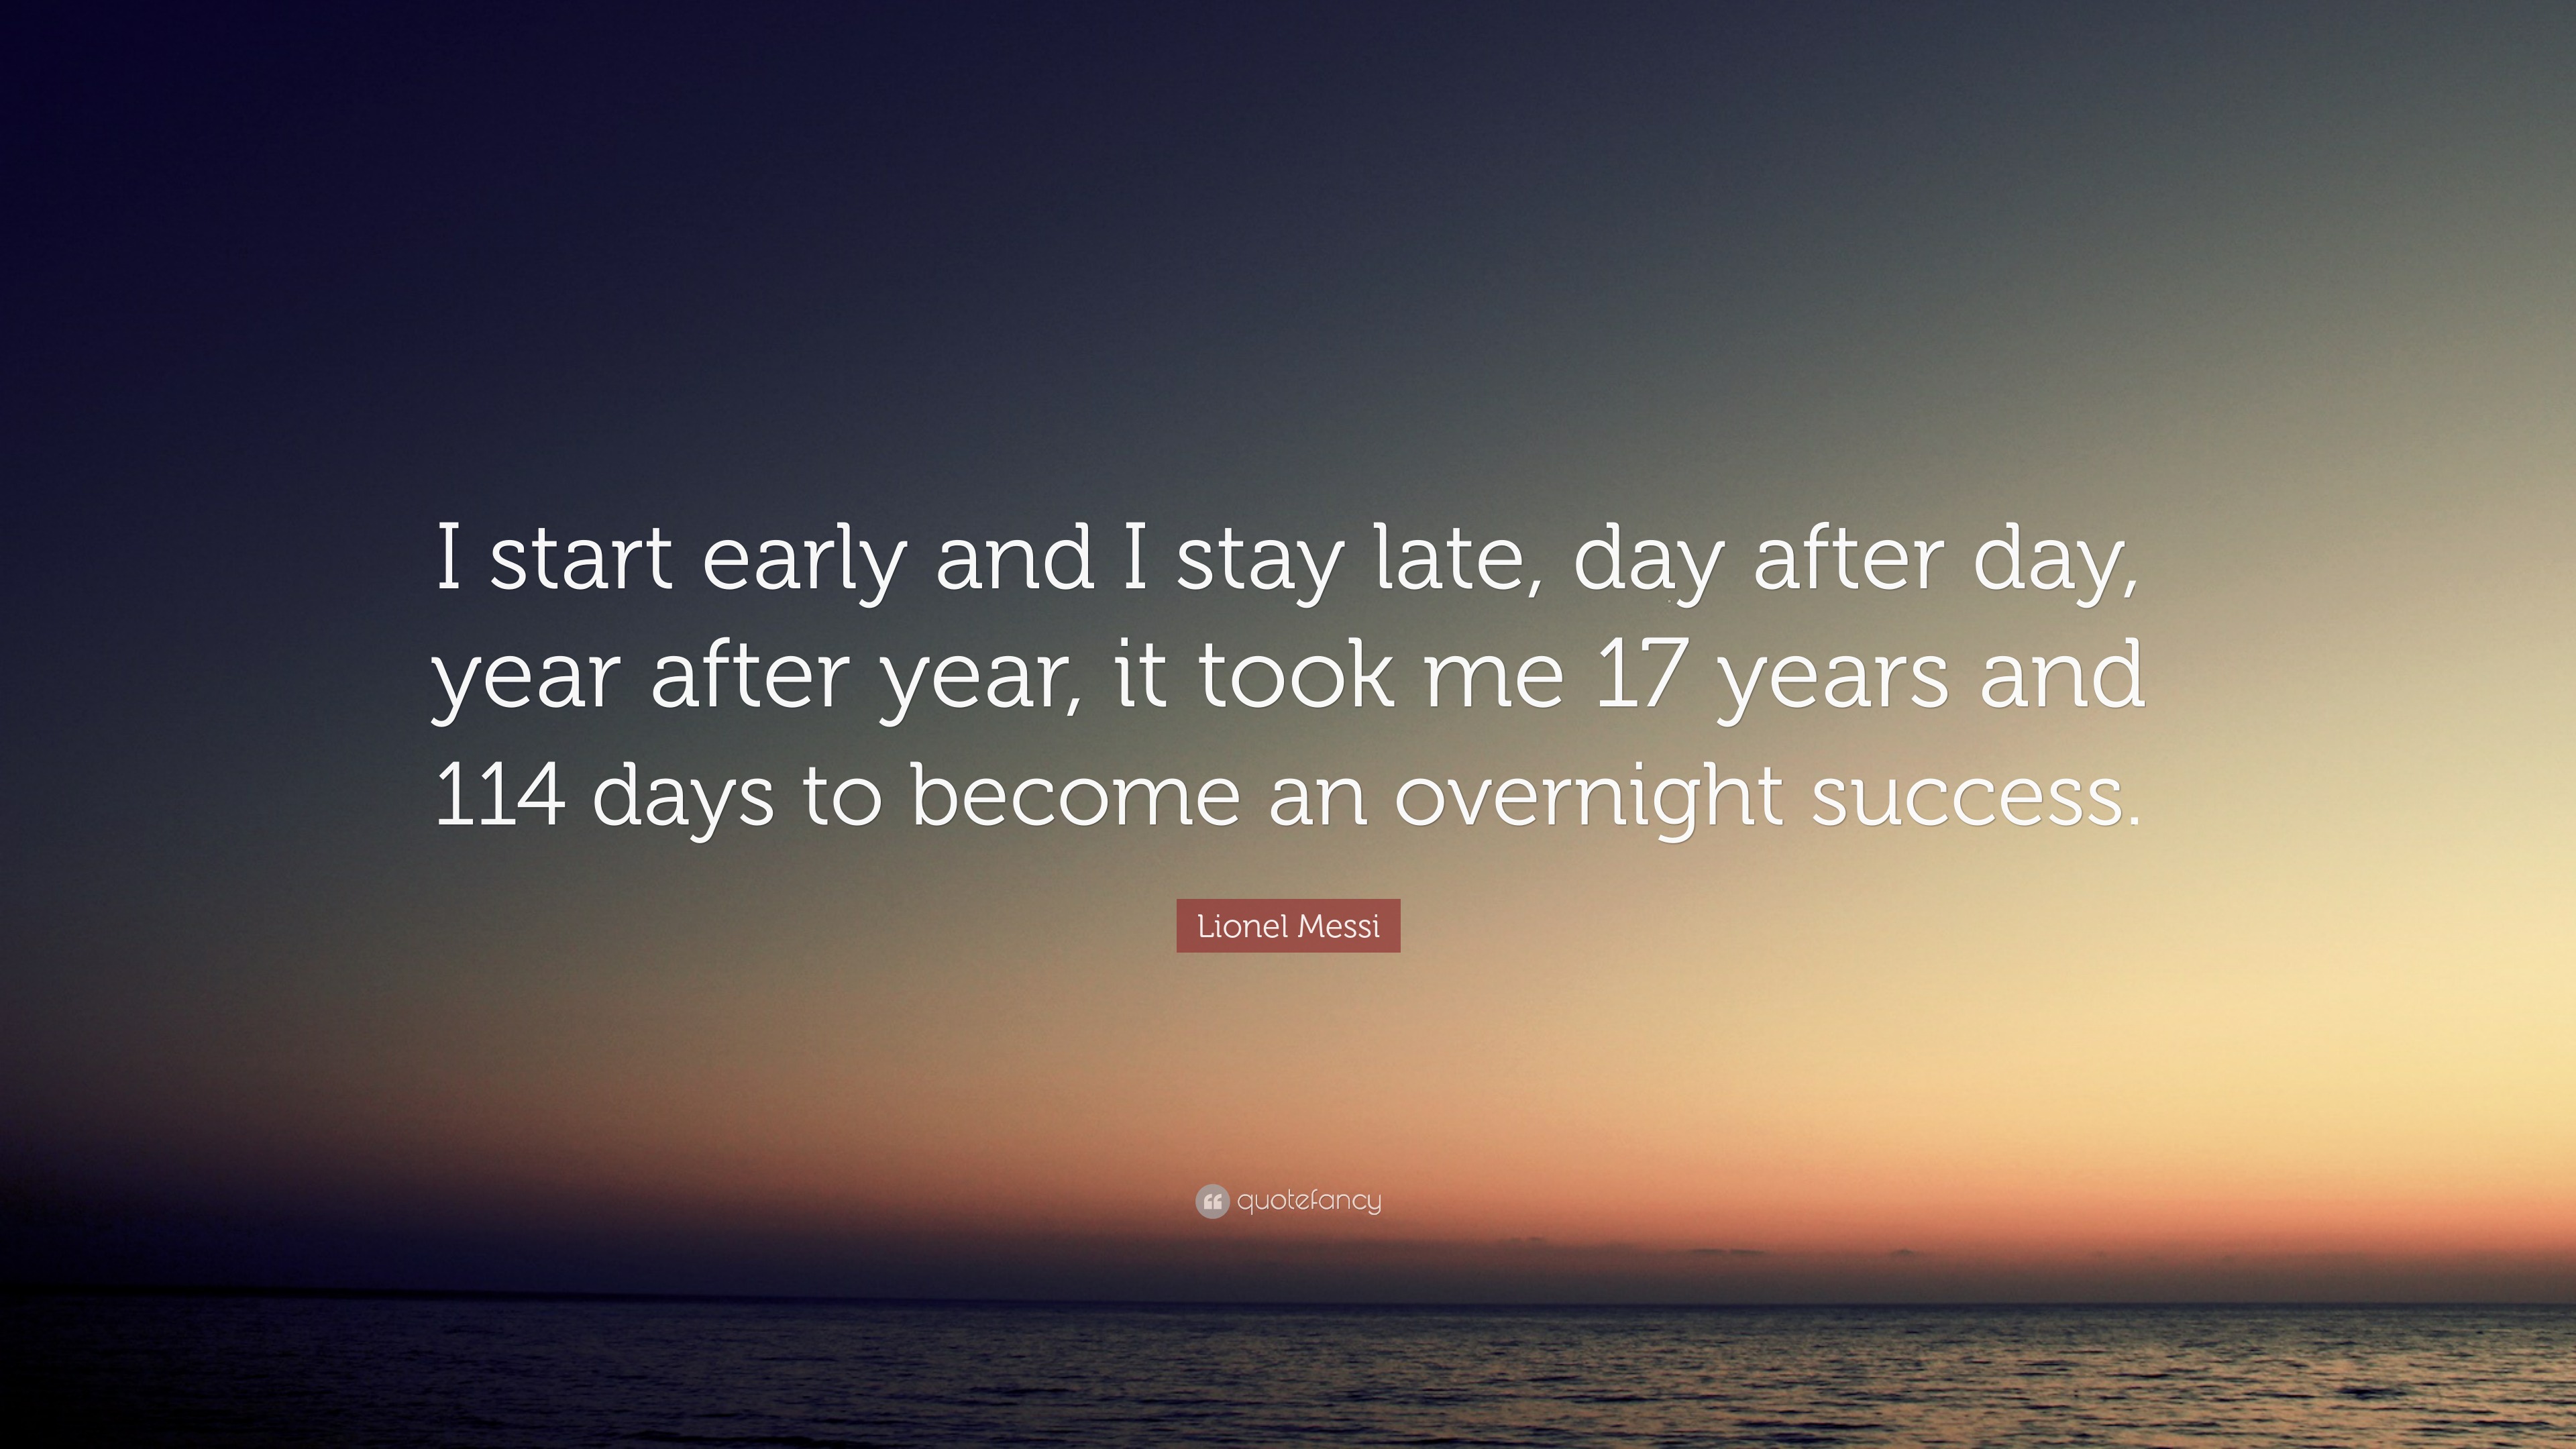 Lionel Messi Quote: “I start early and I stay late, day after day, year ...